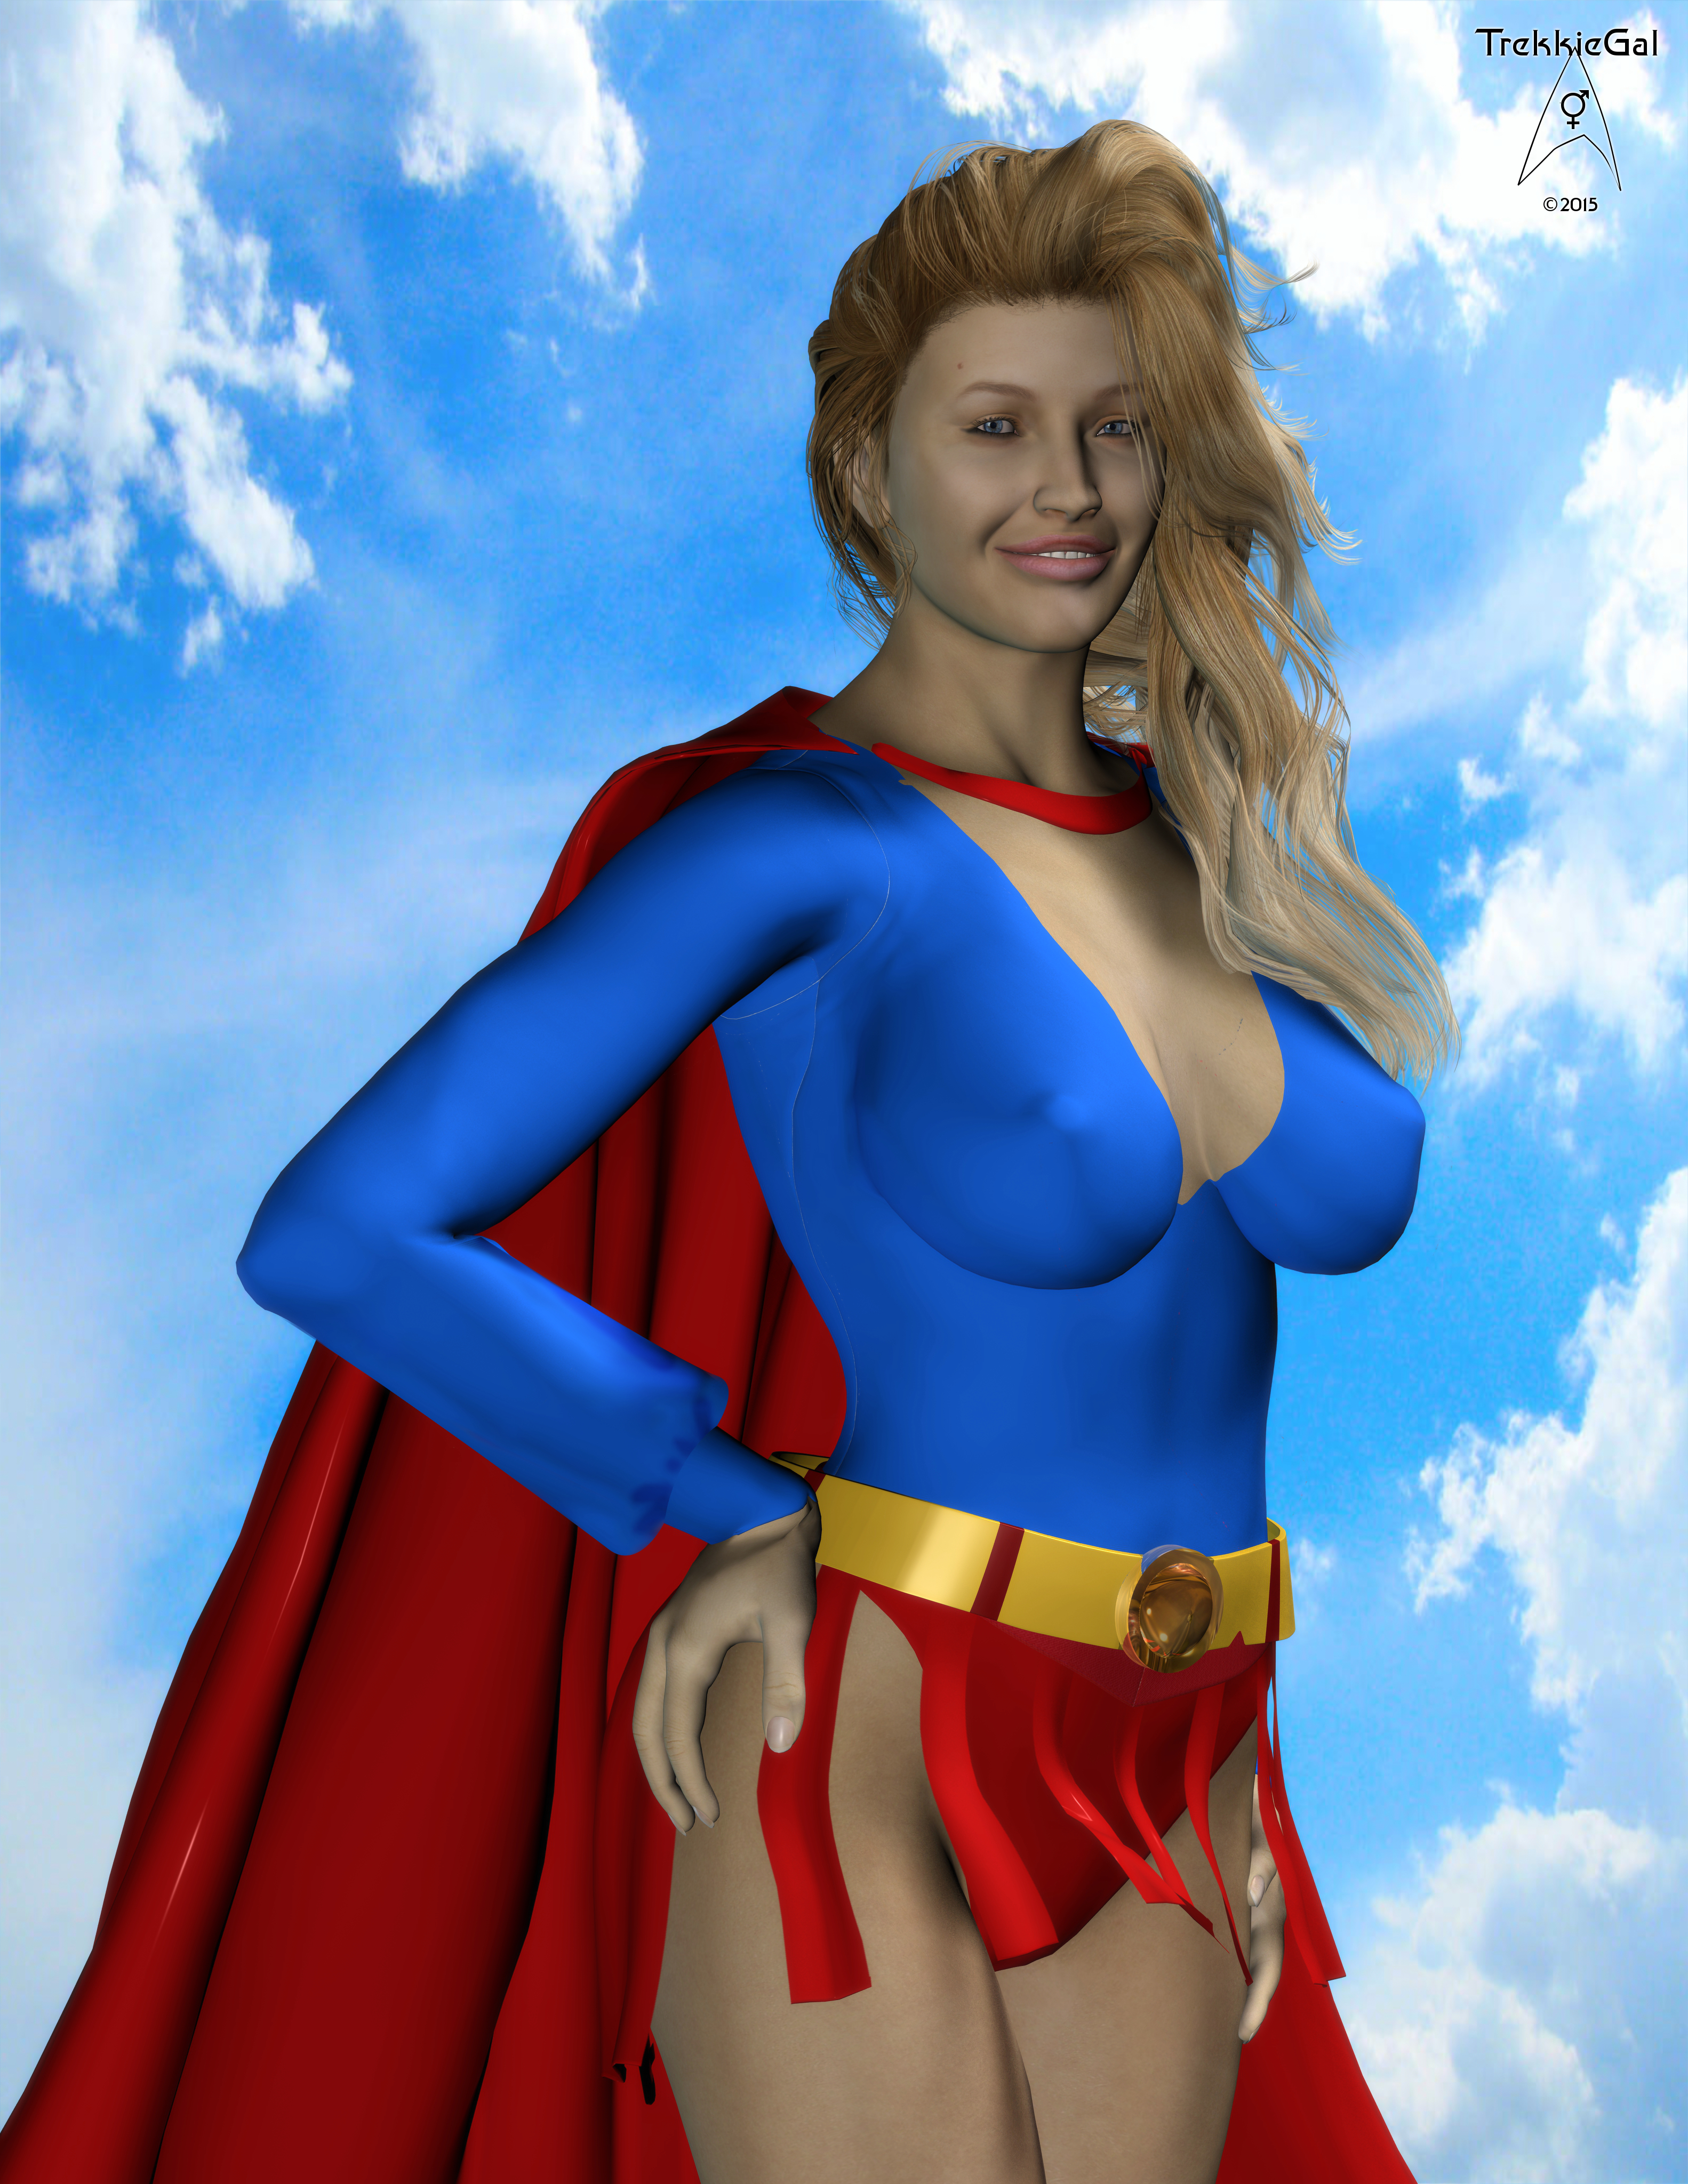 A Little More Daring SuperGirl - 2